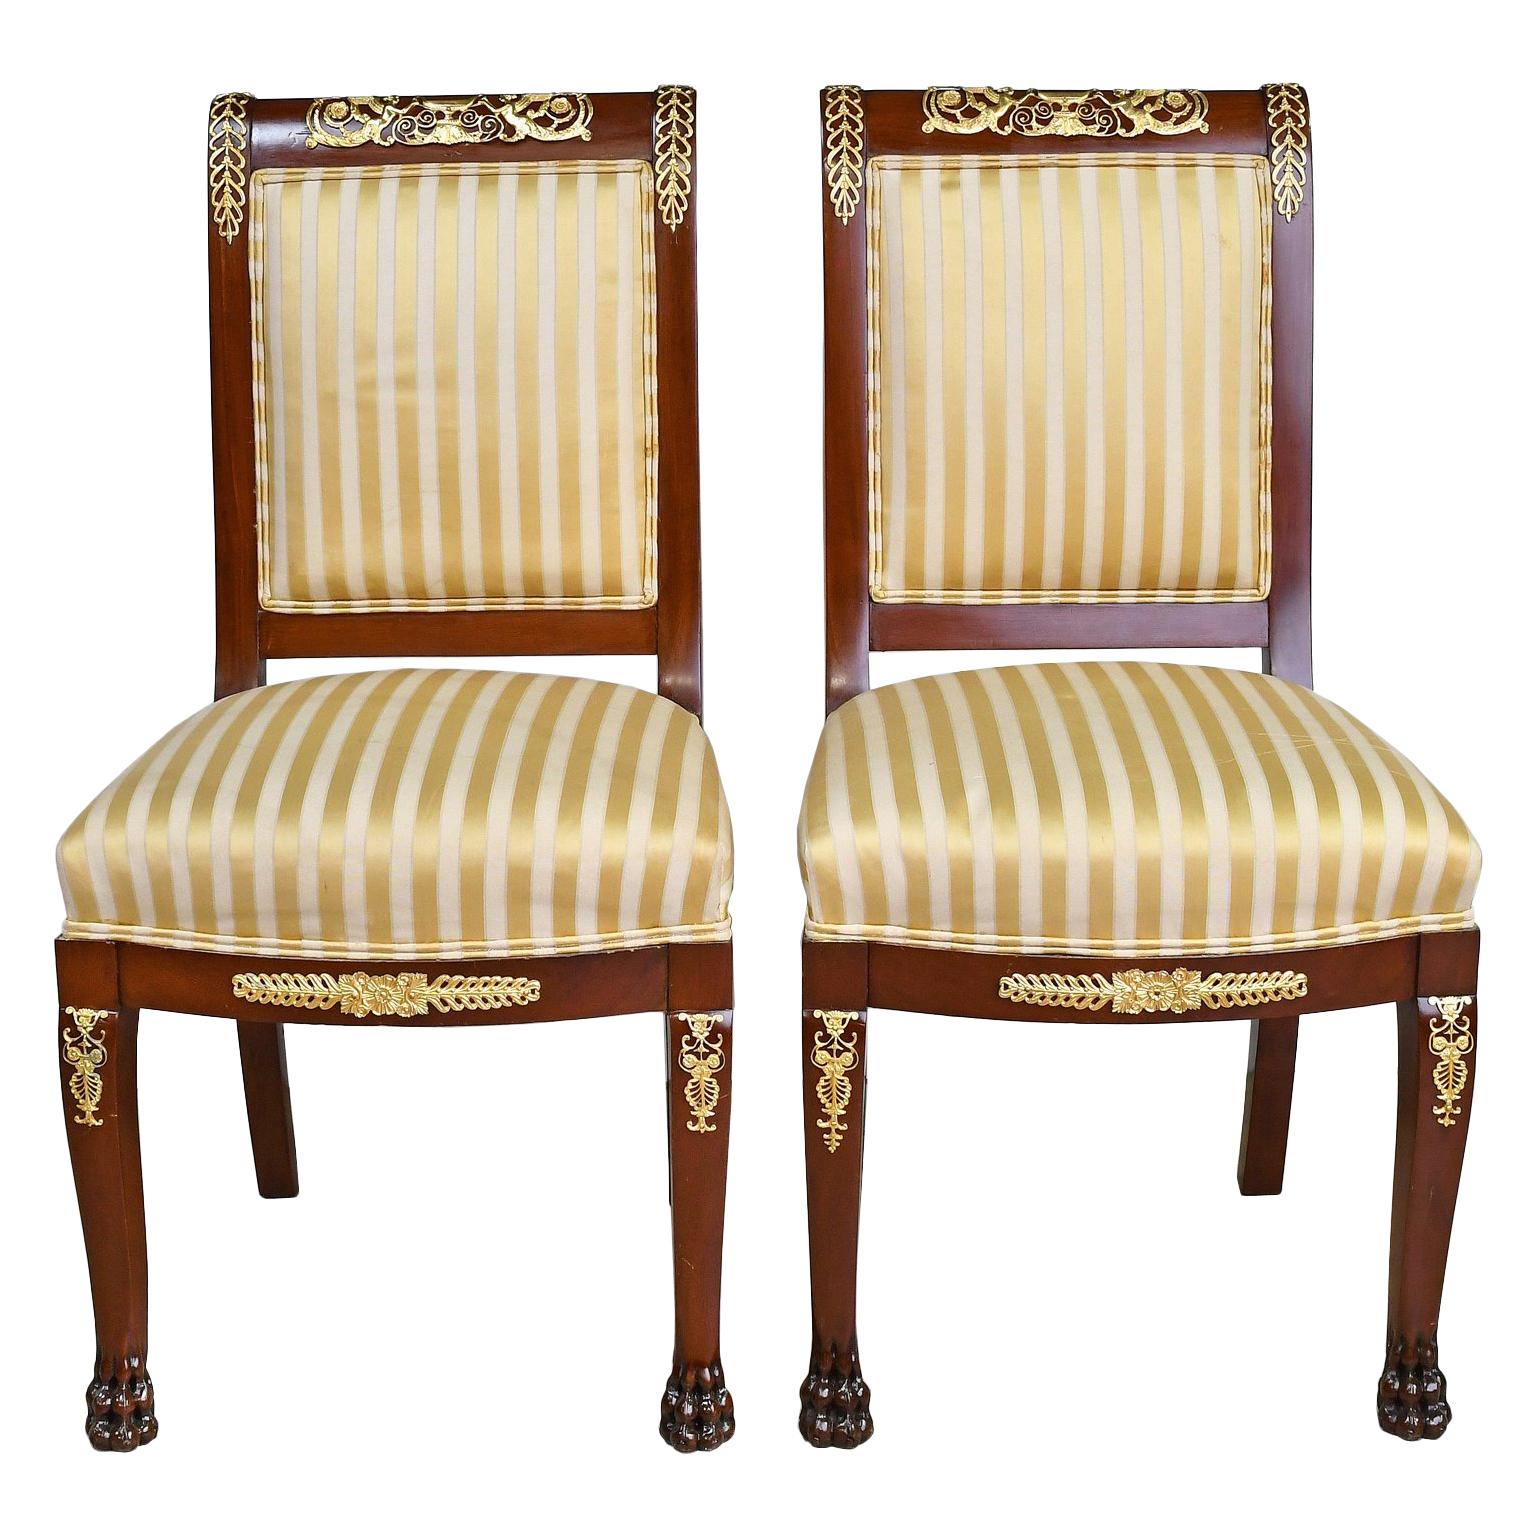 Pair of Empire-Style Chairs in Mahogany with Bronze Doré Ormolu, France, c. 1915 3